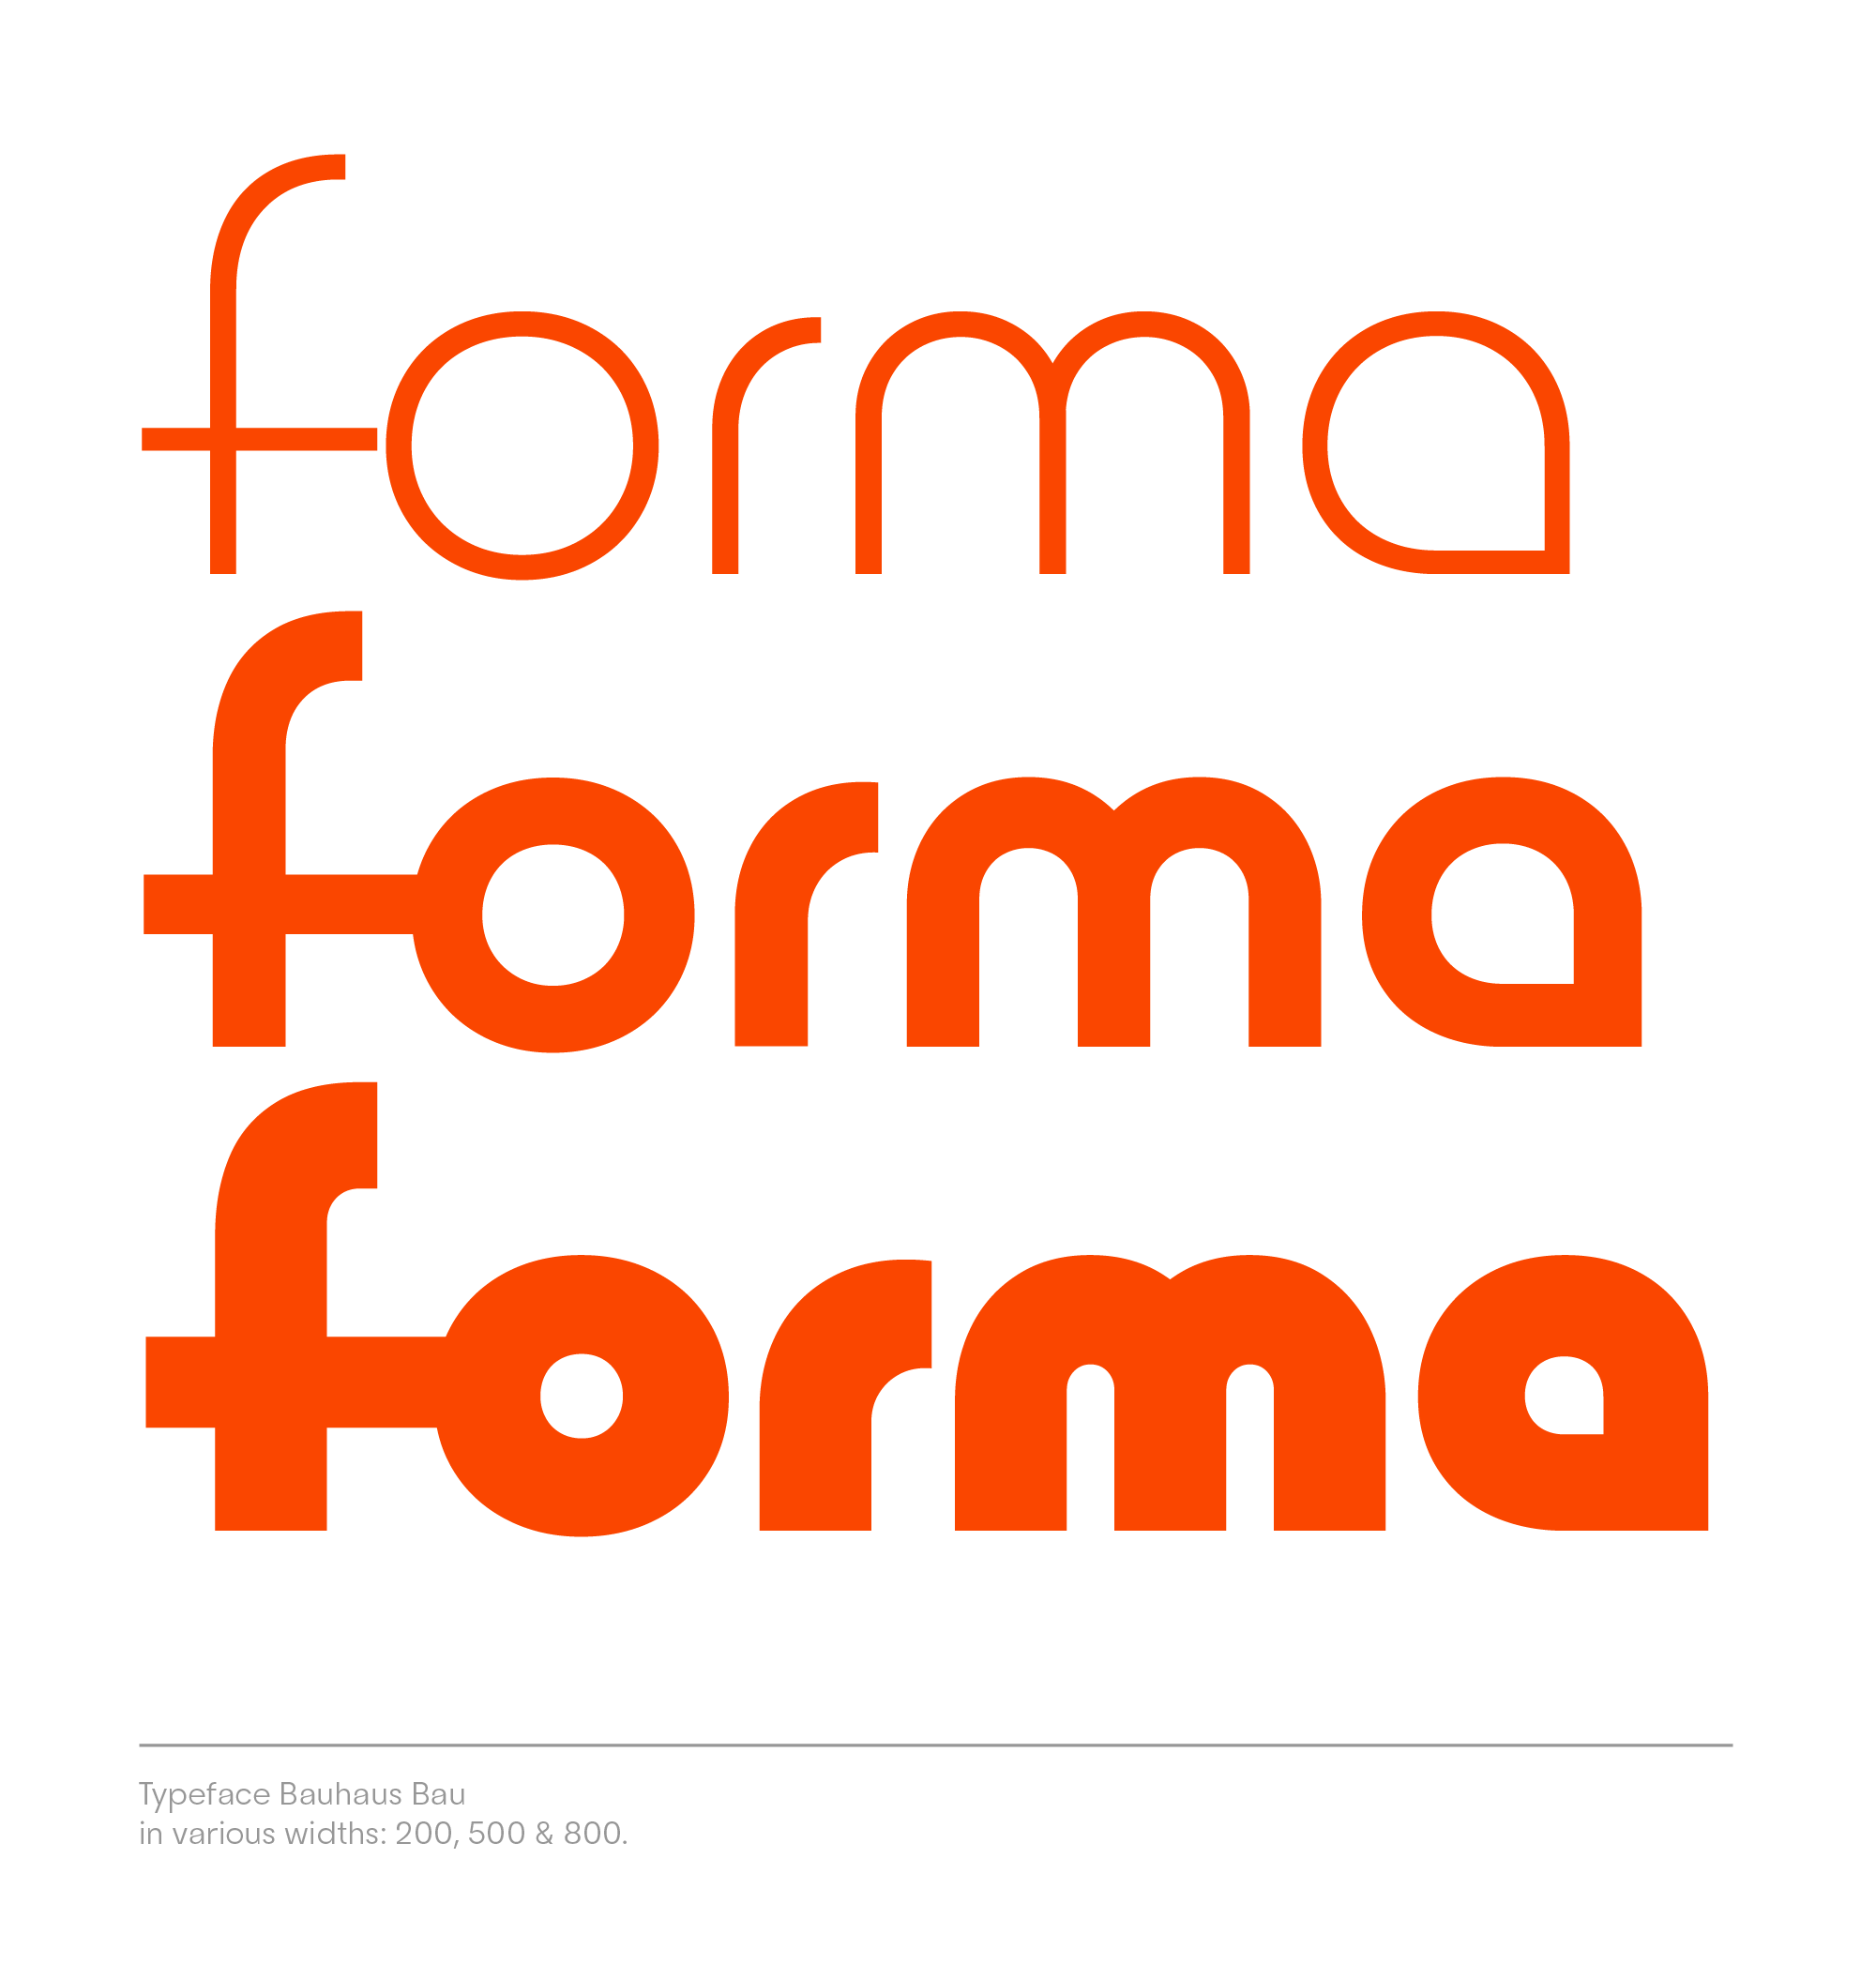 weight difference of modern typography logos